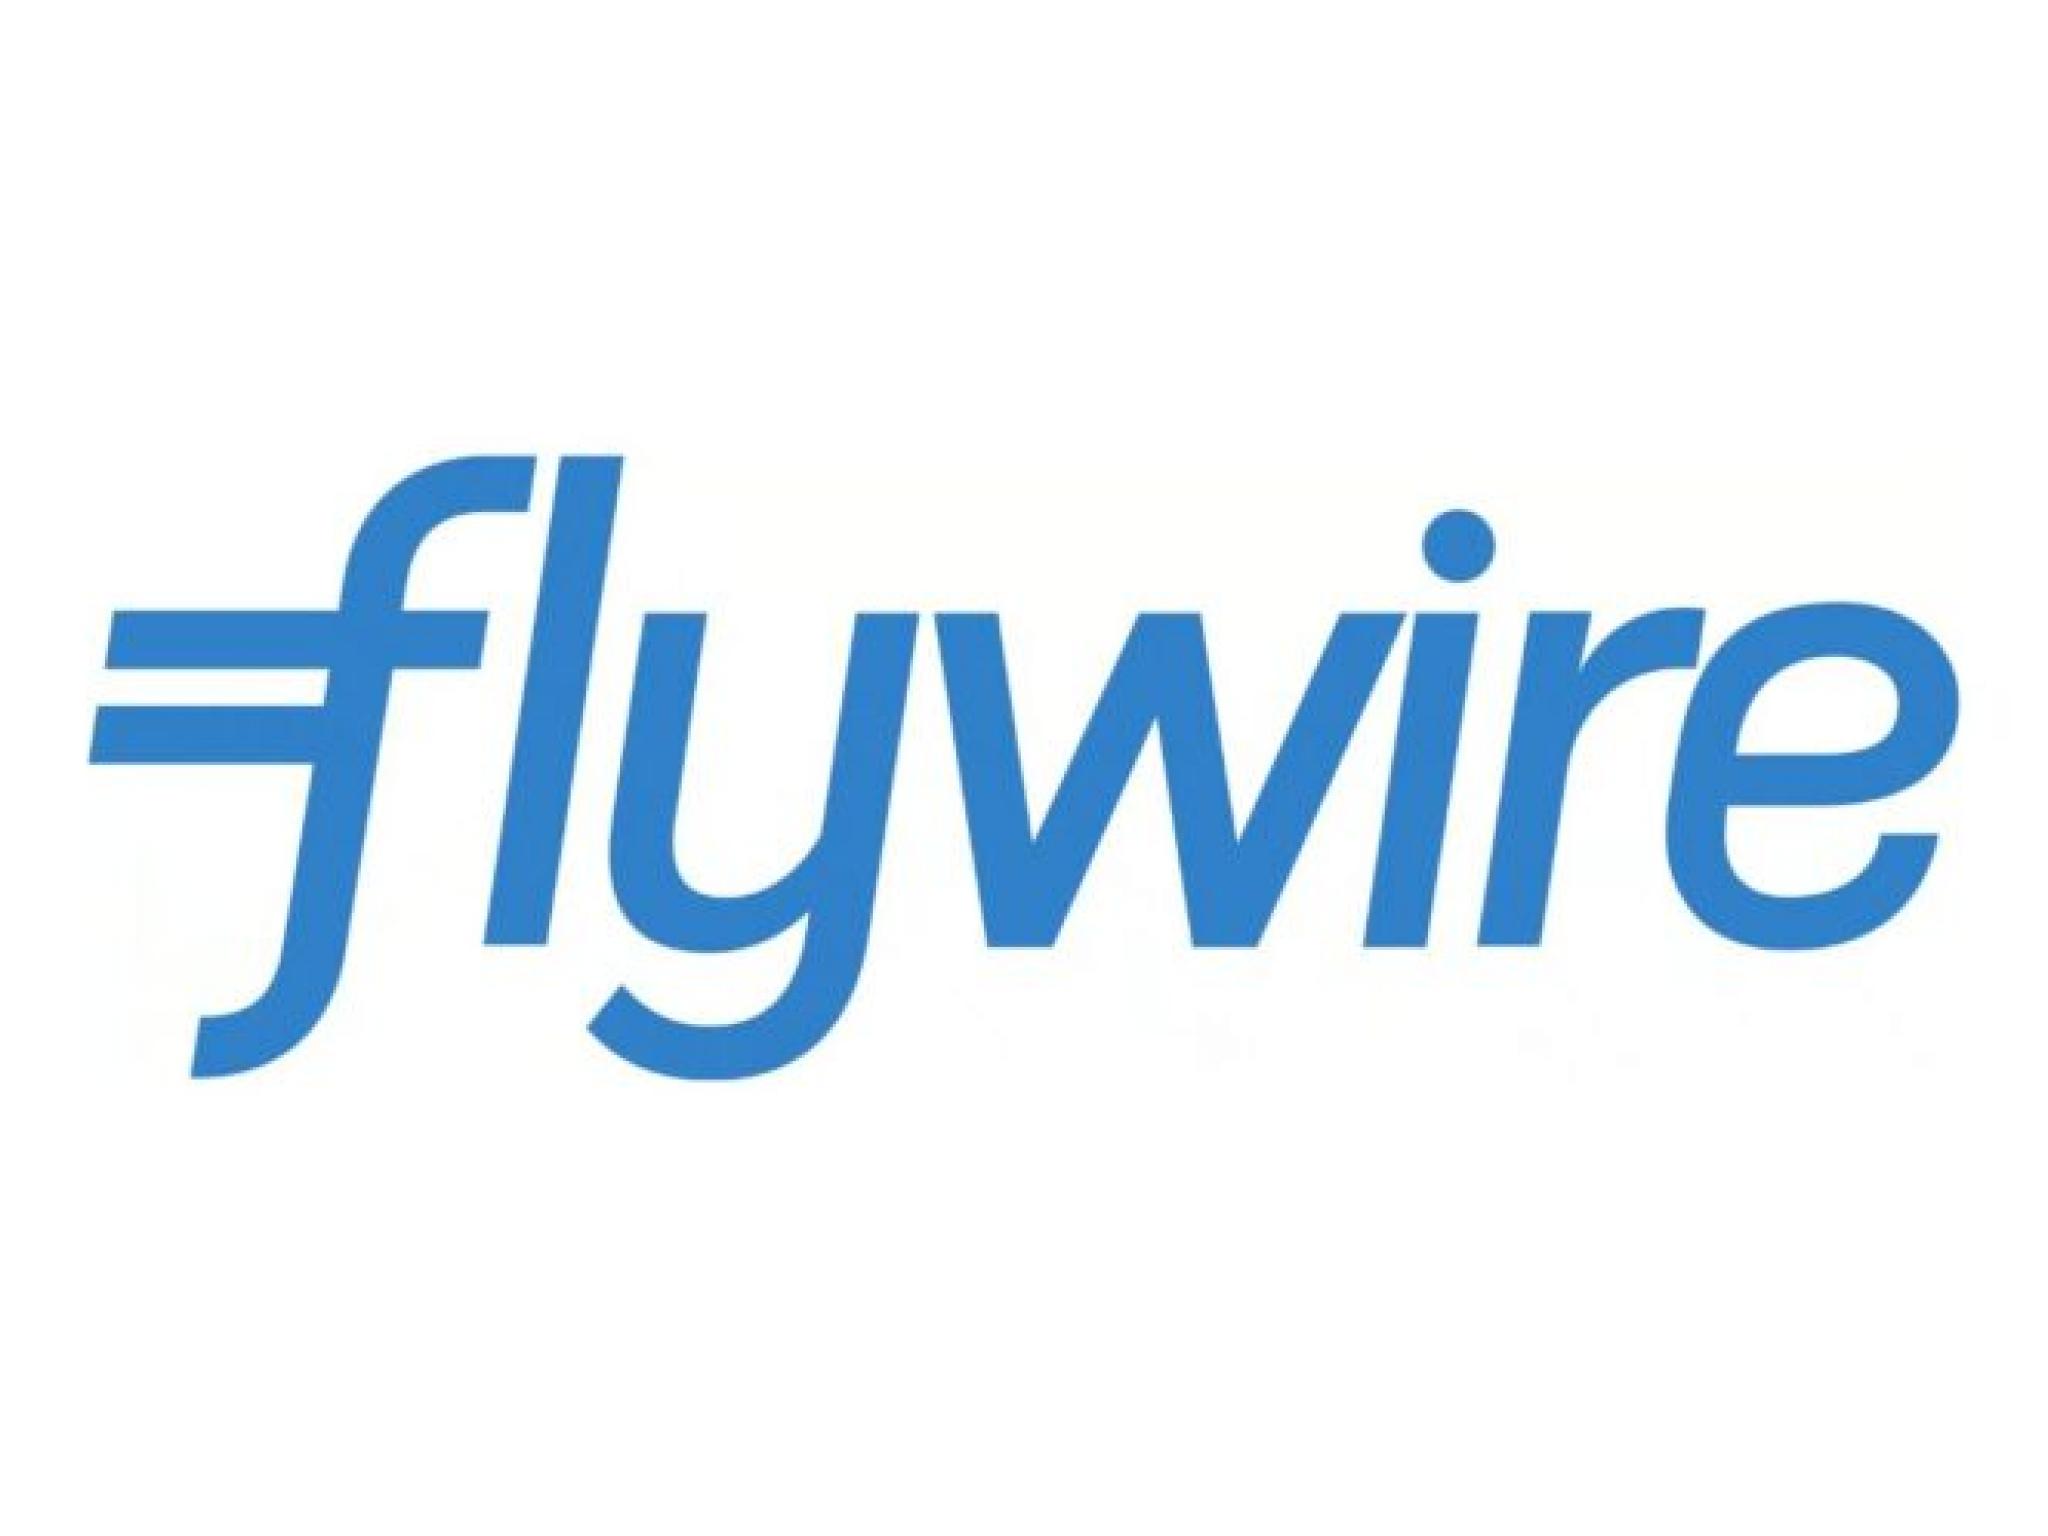  flywire-reports-q1-loss-joins-zoominfo-inspire-medical-systems-and-other-big-stocks-moving-lower-in-wednesdays-pre-market-session 